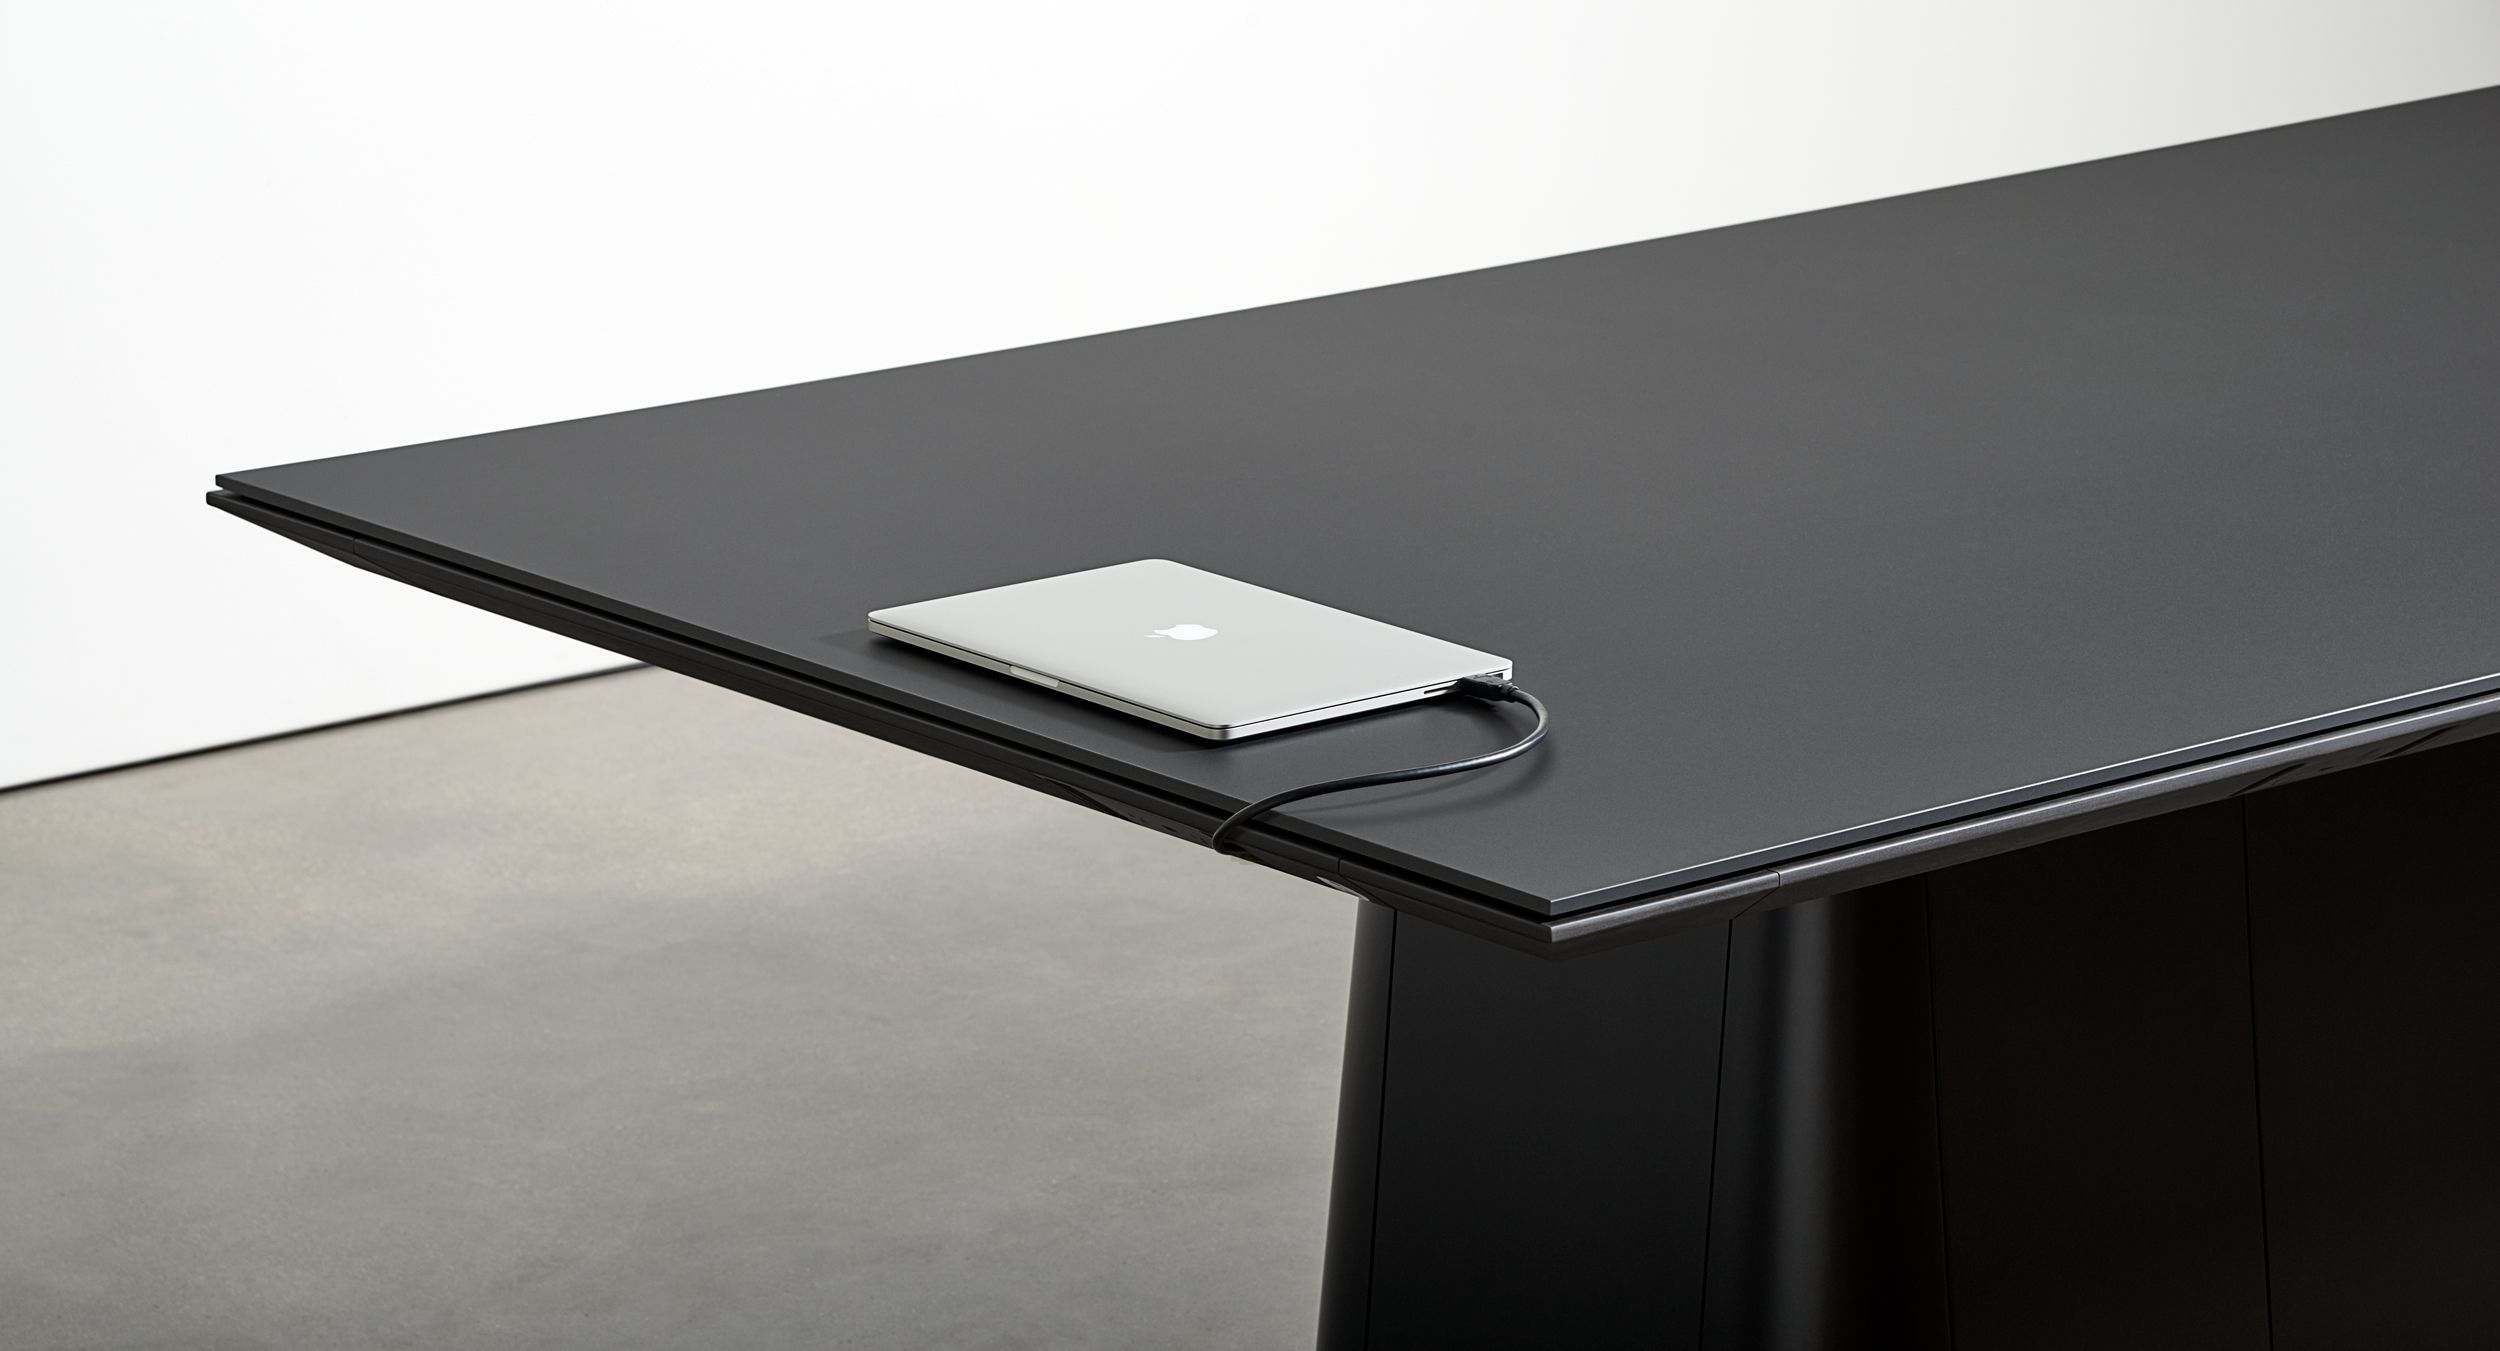 The revolutionary Halo soft edge provides patented protection for table and chair while delivering vital connectivity.